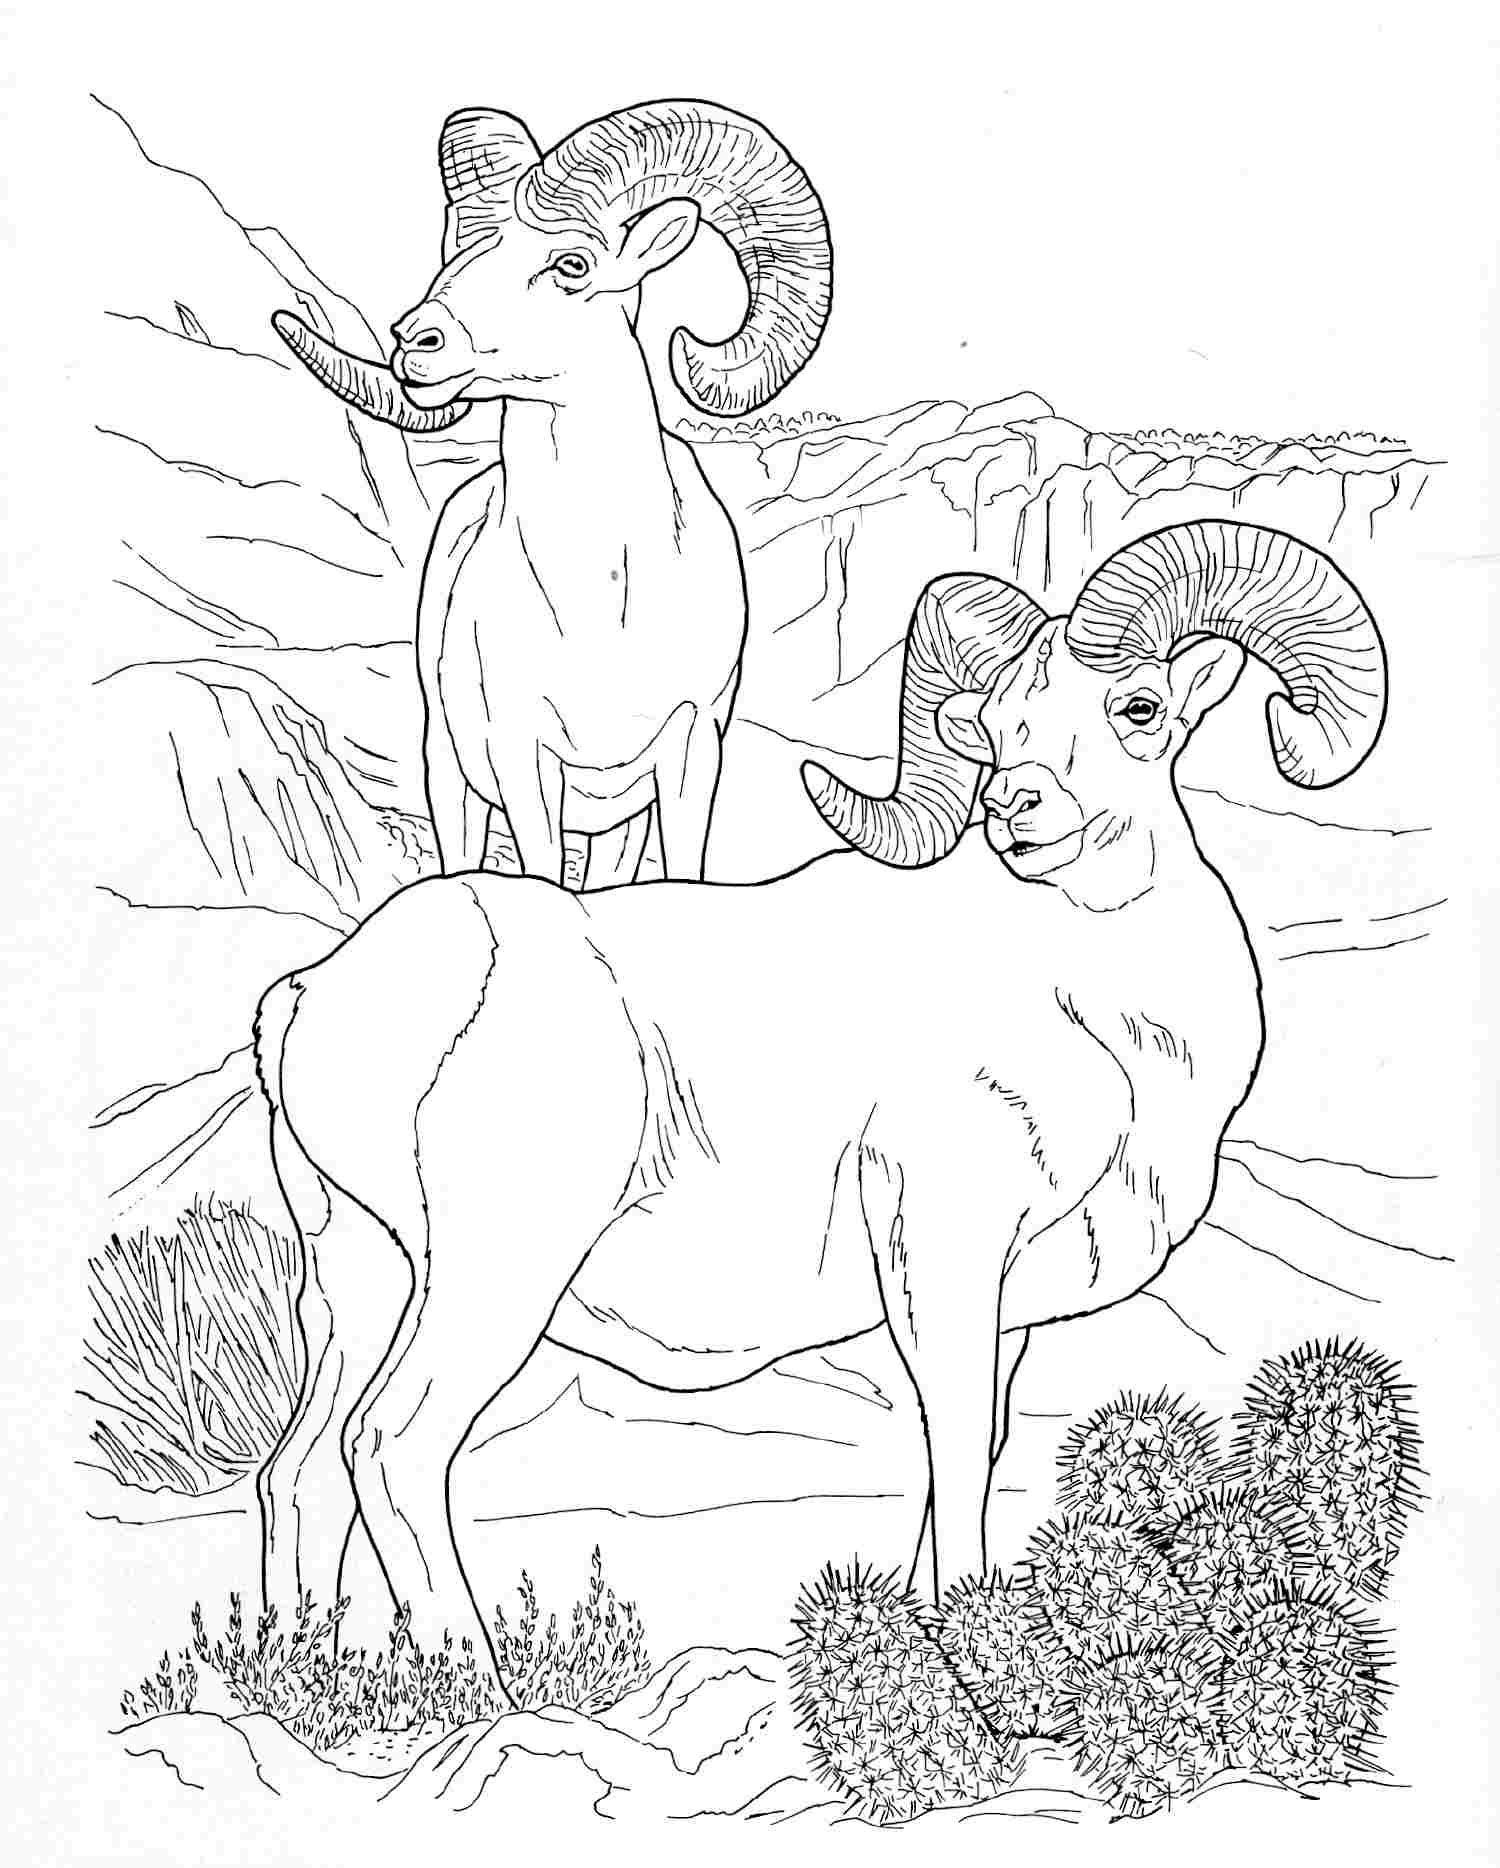 20 Pics Of North American Wildlife Coloring Pages   Wild Animal ...